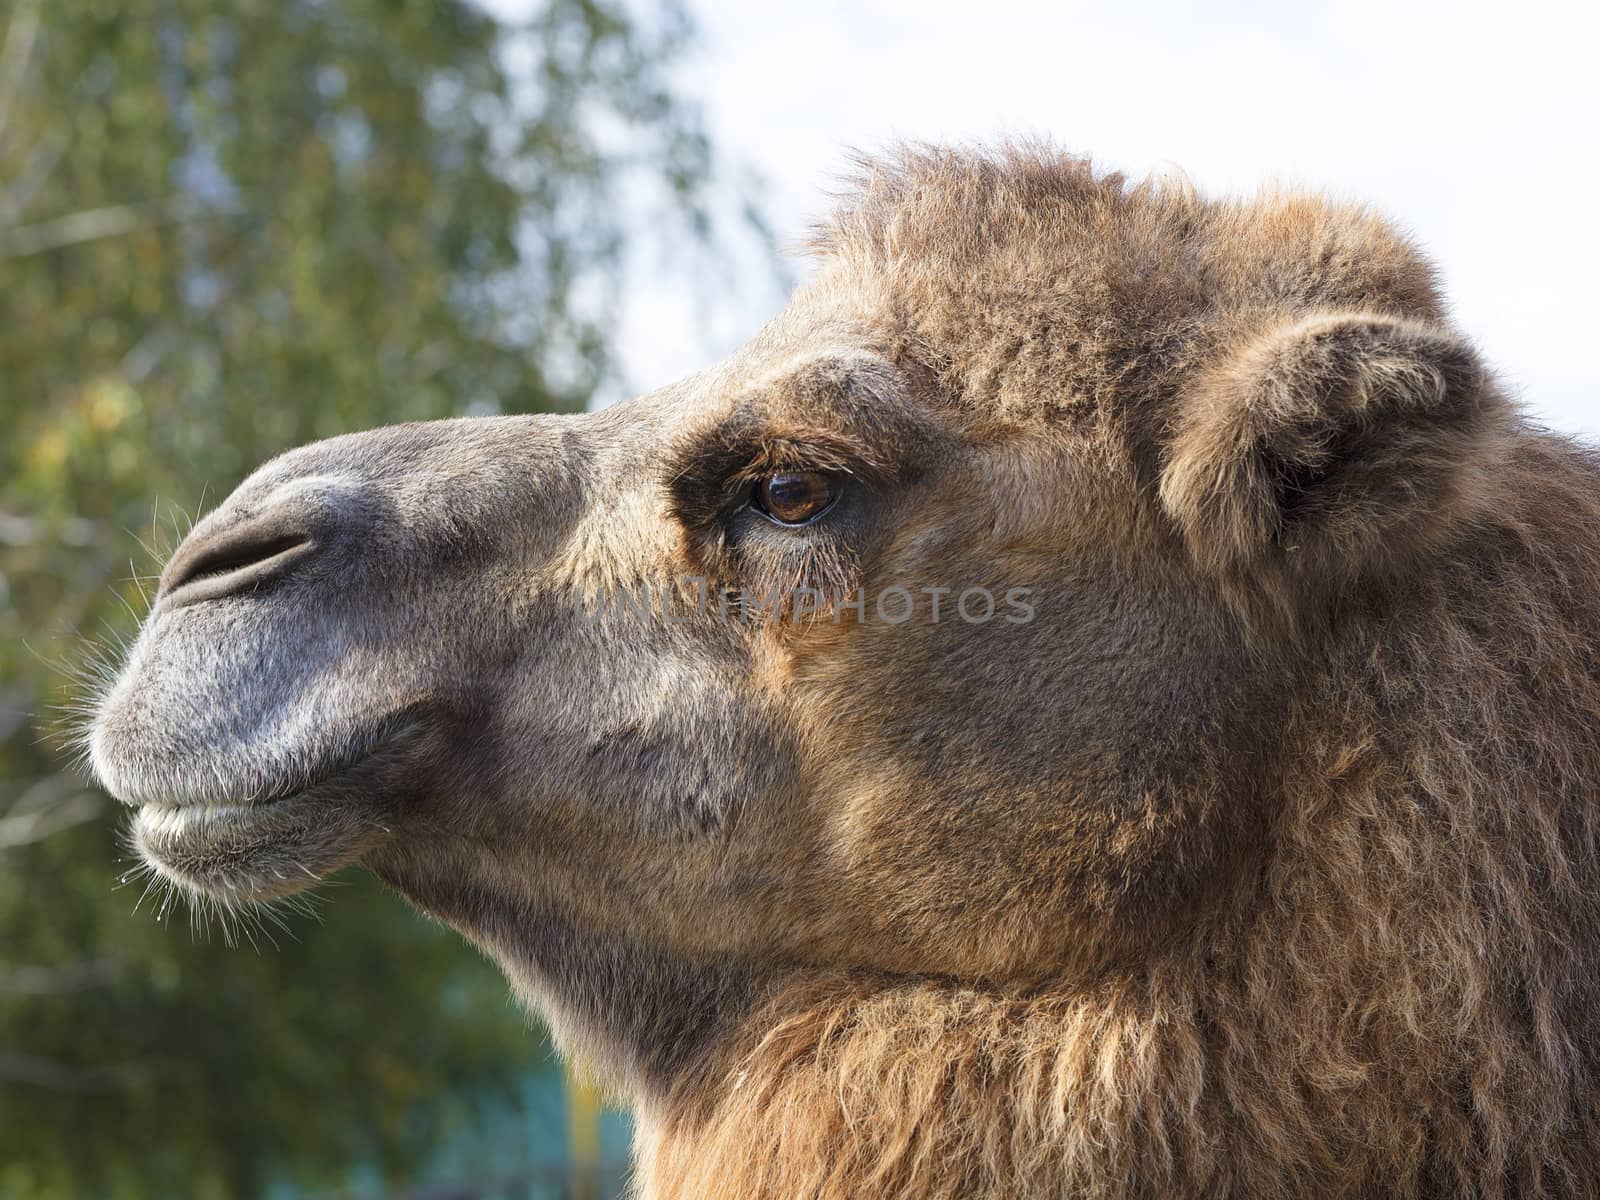 the head of an adult camel in profile by Sergii